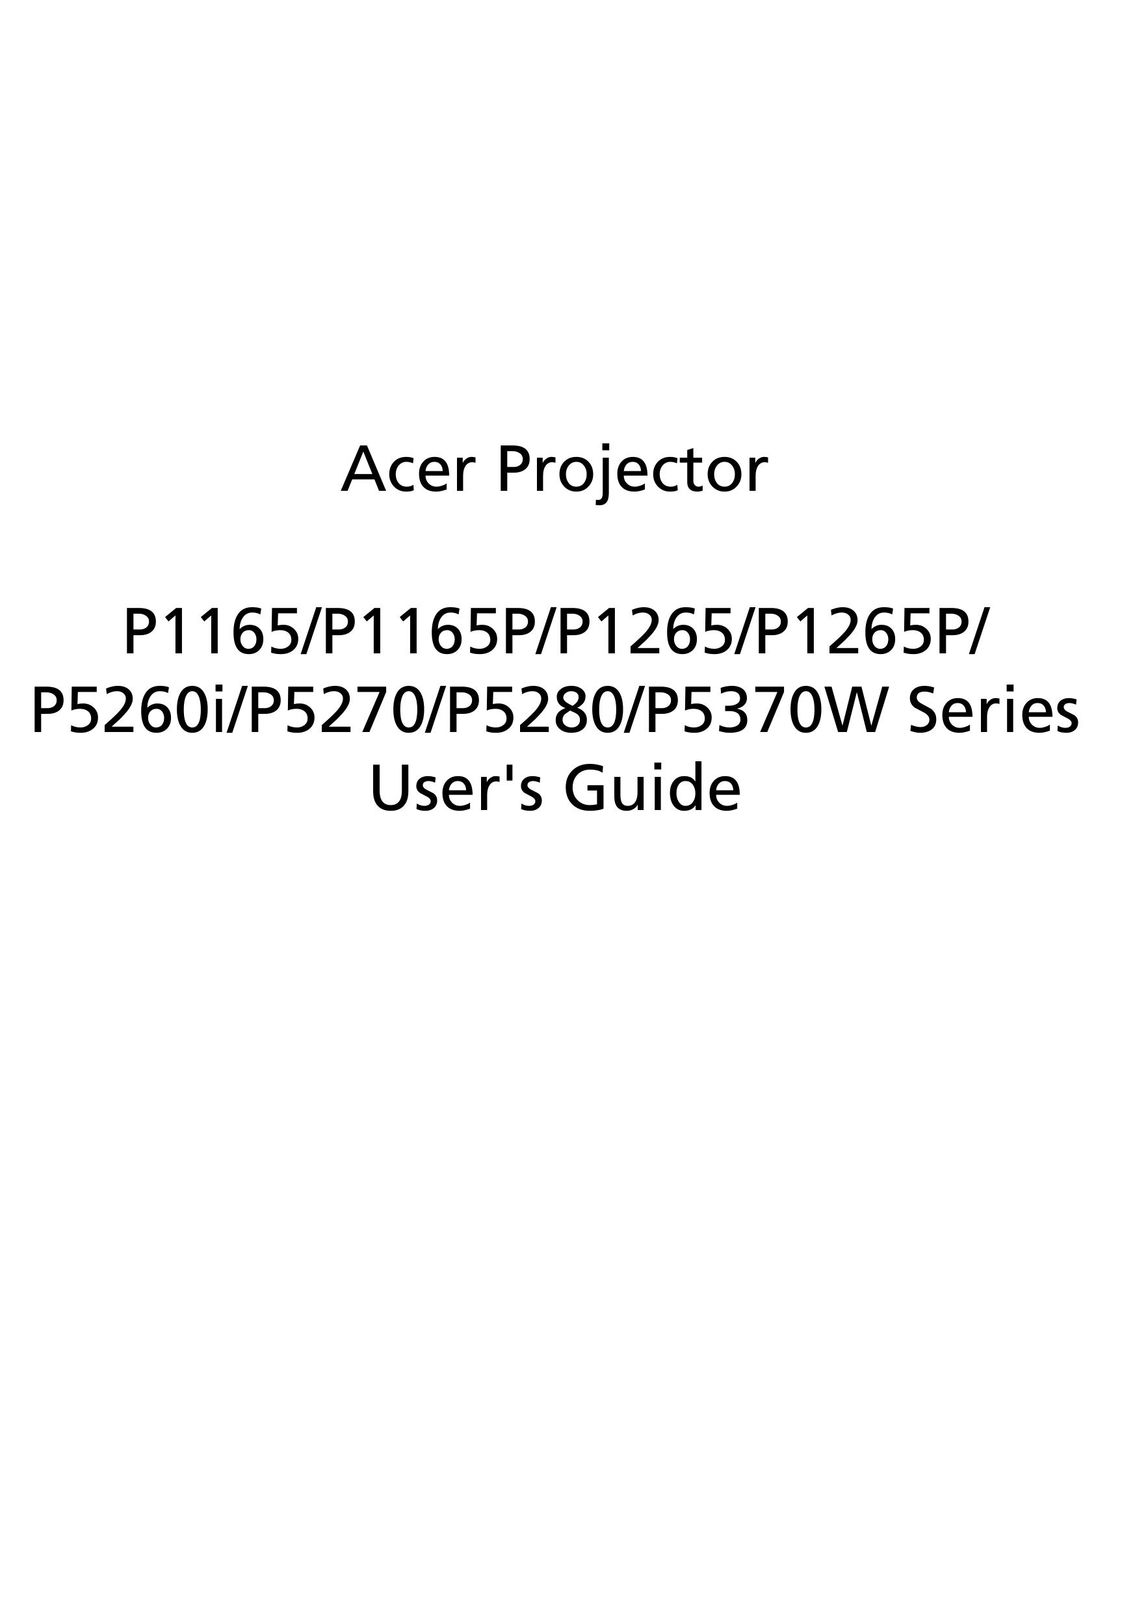 Acer P1265 Projector User Manual